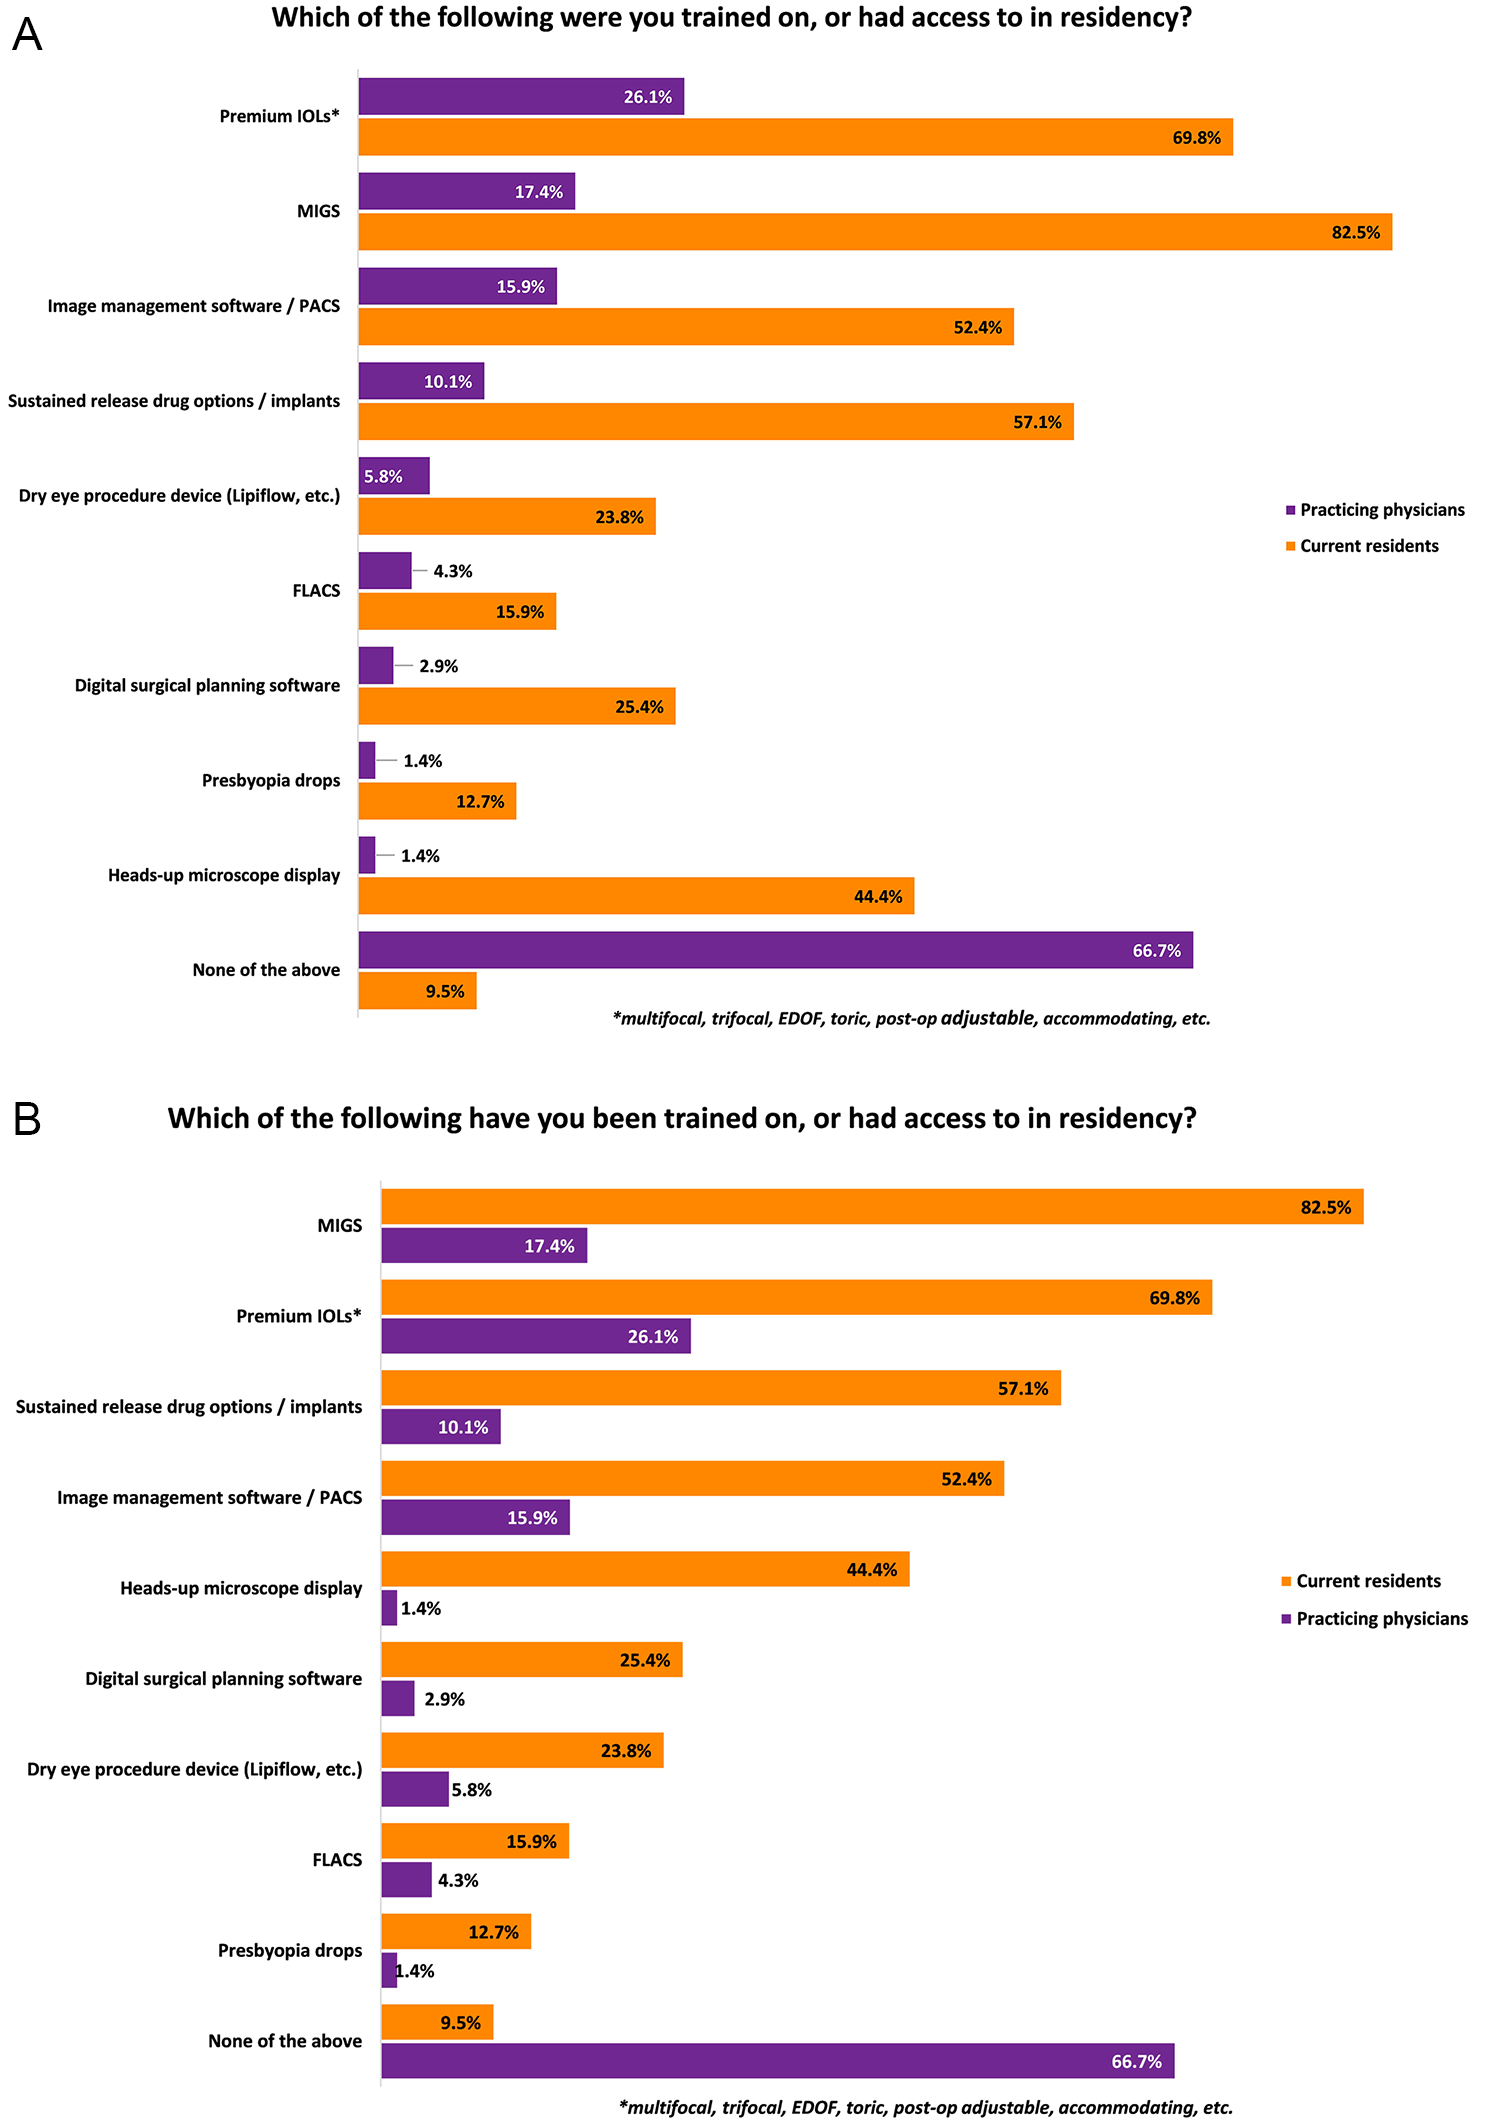 A survey of perceptions of exposure to new technology in residents and practicing ophthalmologists